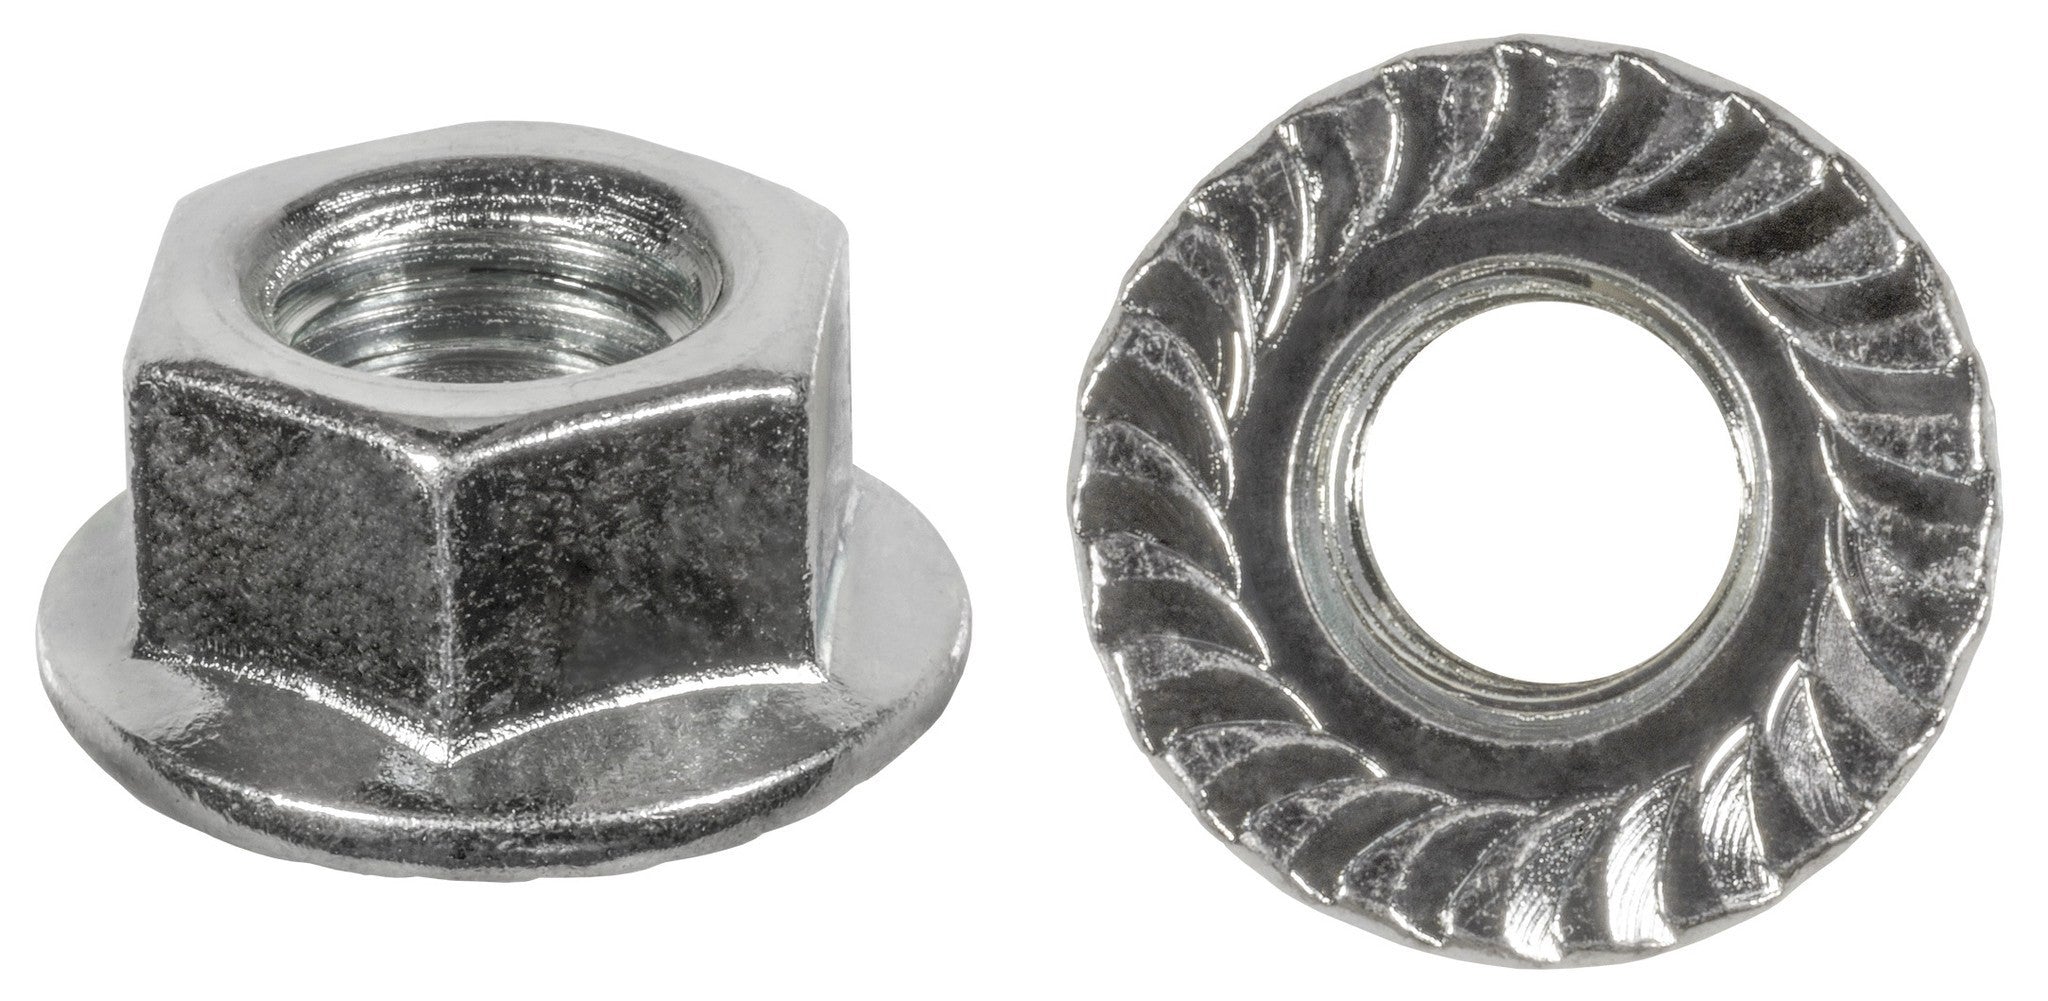 Auveco 22045 Metric Spin Lock Nut With Serrations, M10-1 5, 15mm Hex Qty 25 